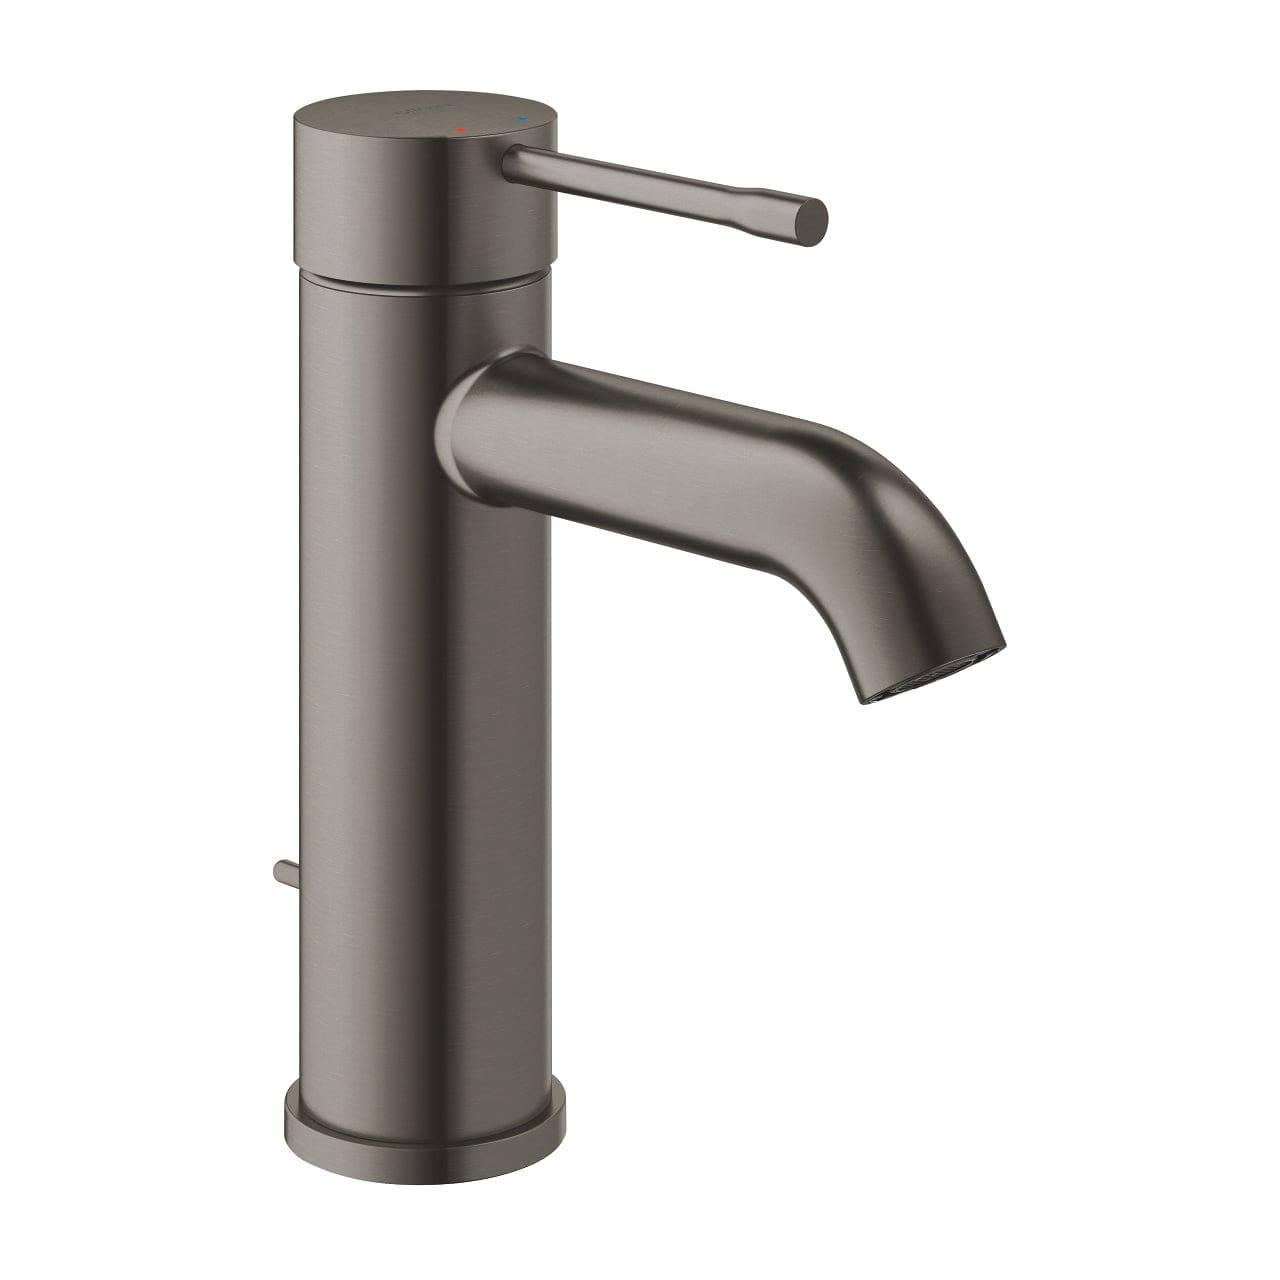 Grohe Essence Basin mixer 1/2″ S-Size, Brushed Hard Graphite | Supply Master | Accra, Ghana Bathroom Faucet Buy Tools hardware Building materials